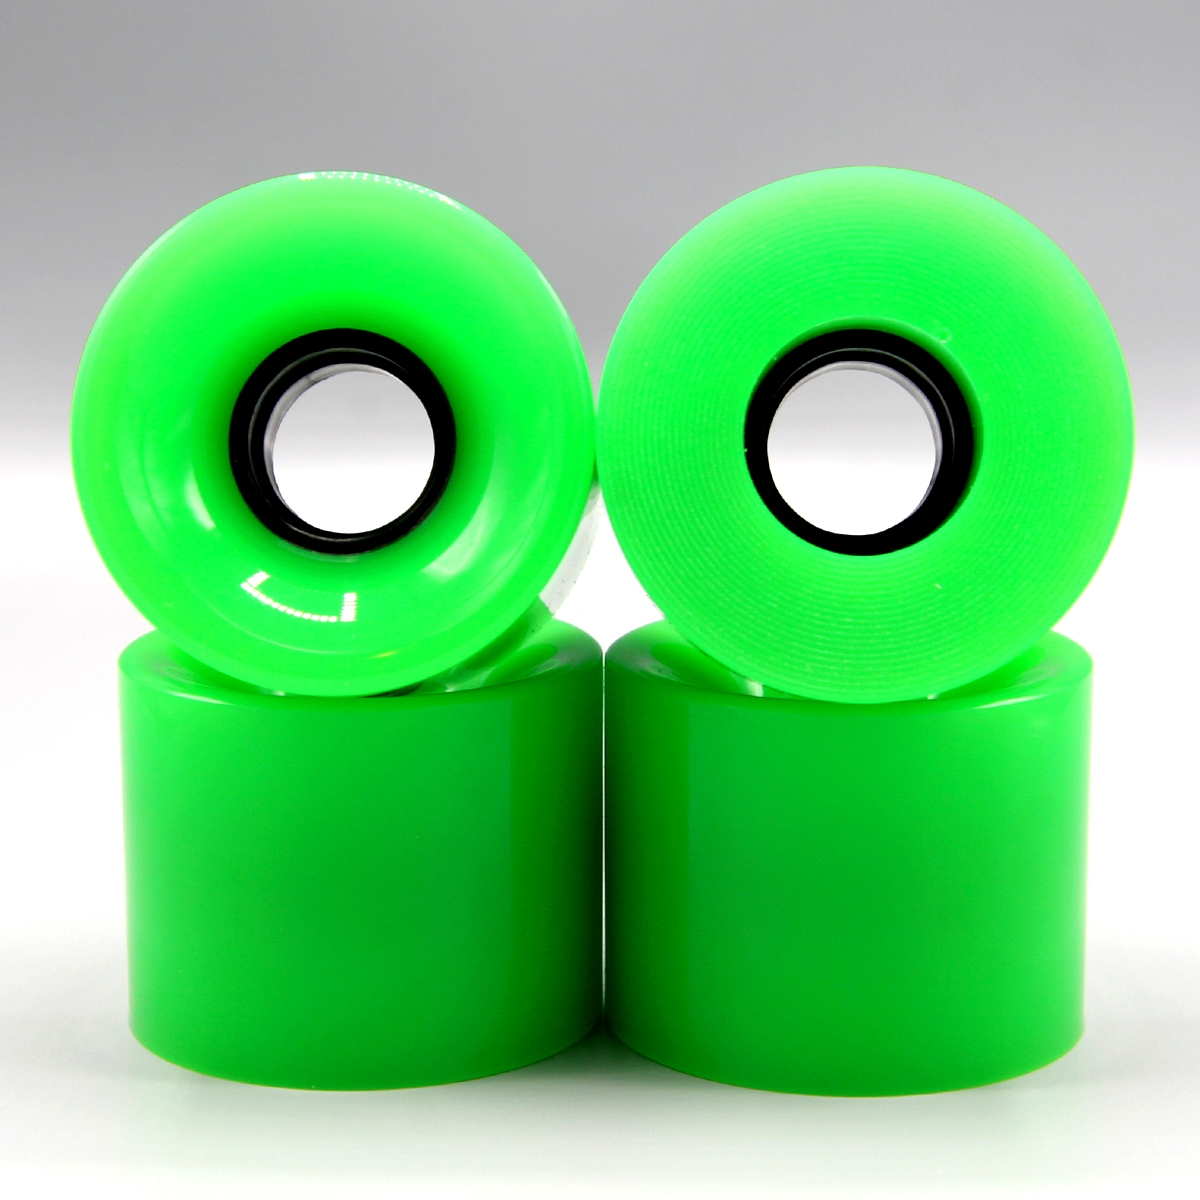 Blank 60mm (Solid Green) - Includes 1/4" Risers